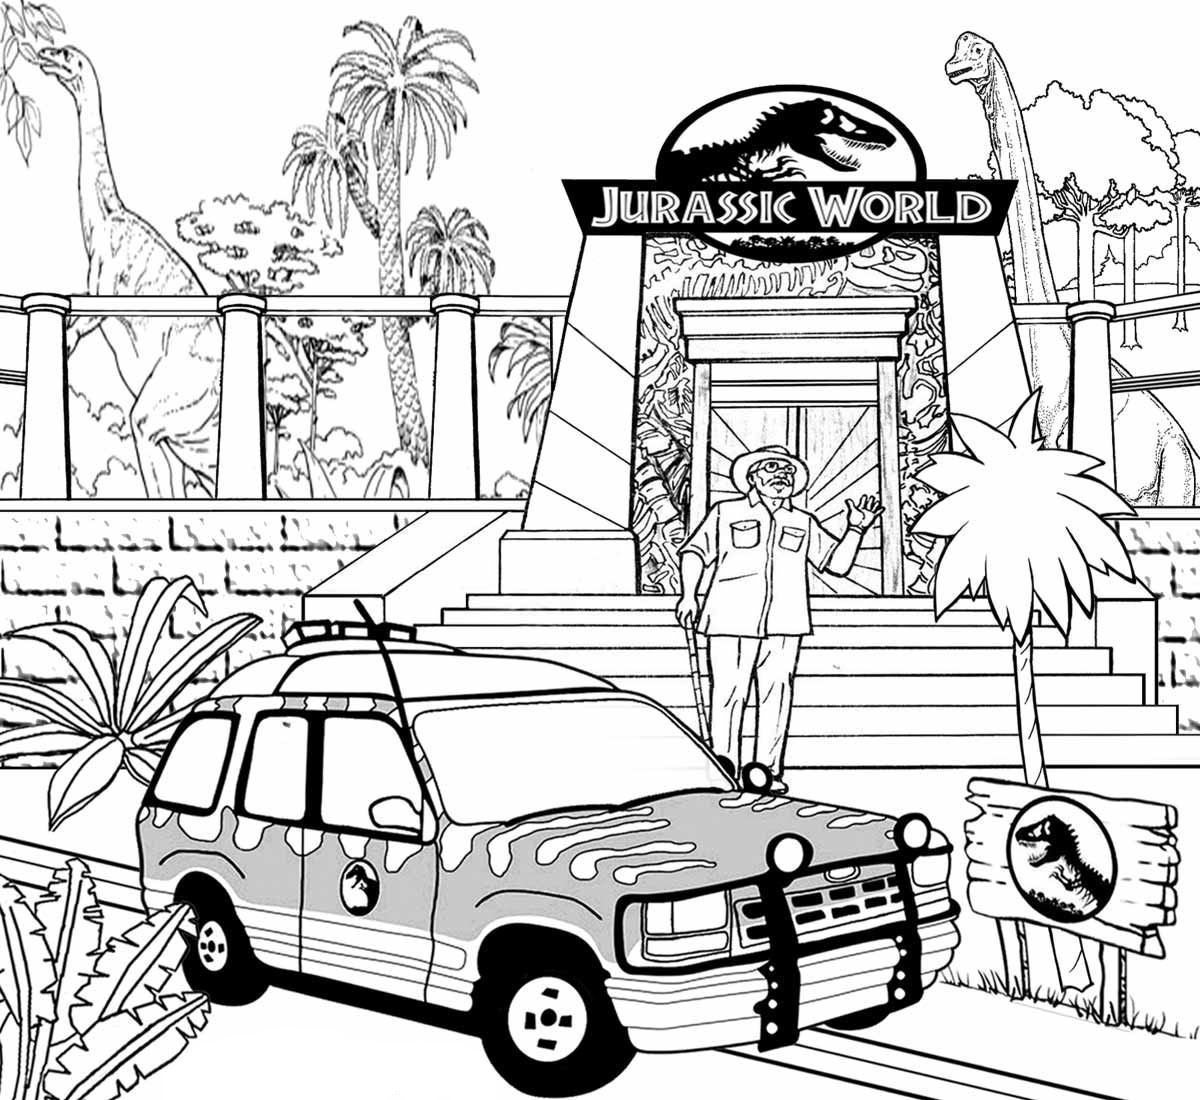 Jurassic World Coloring Pages   Best Coloring Pages For Kids